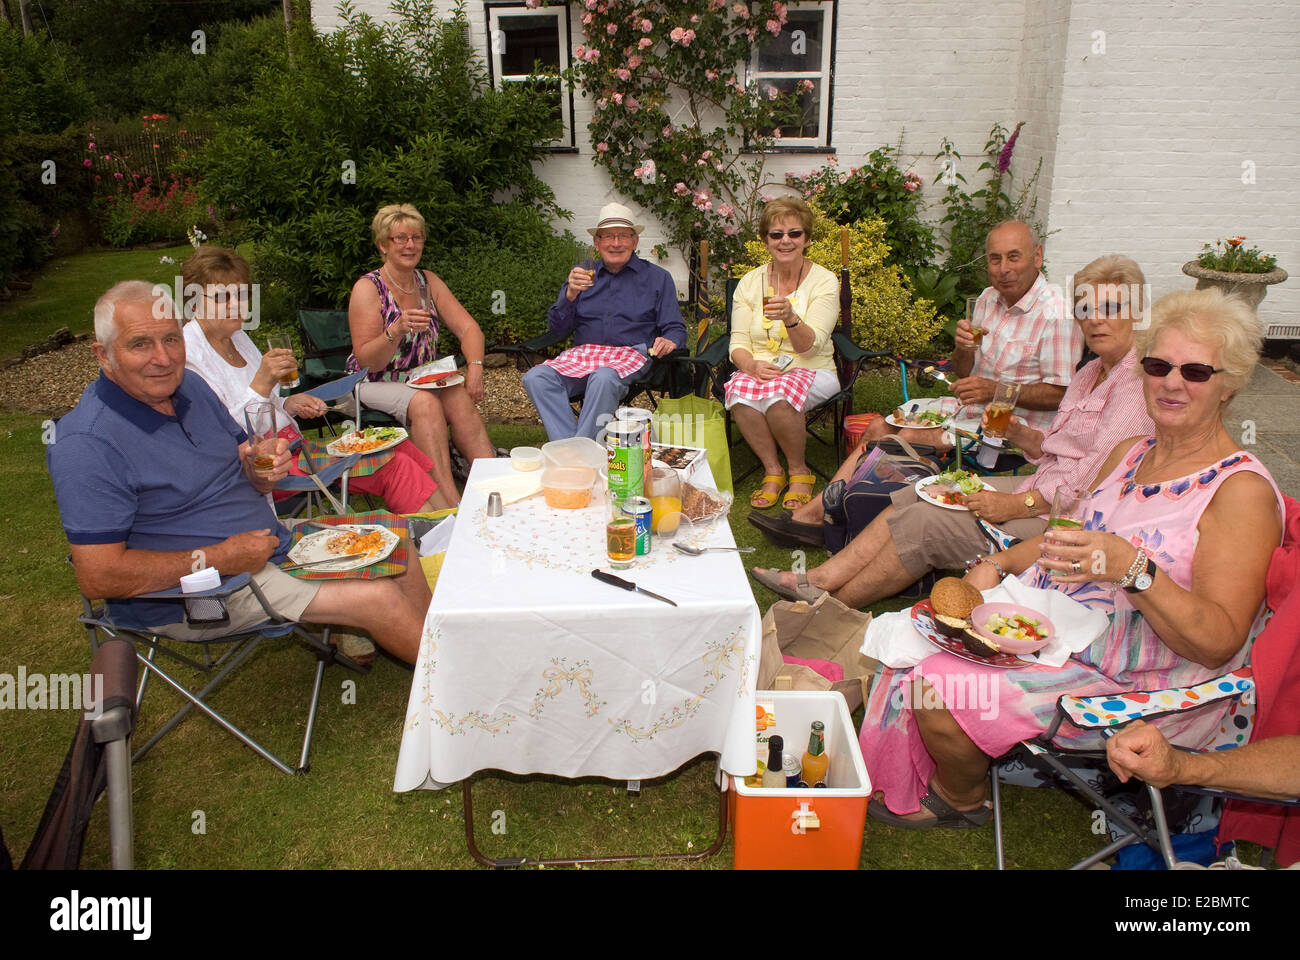 Group of people enjoying a picnic and drinks at a summer garden/Pimms party, Standford, Hampshire, UK. Stock Photo